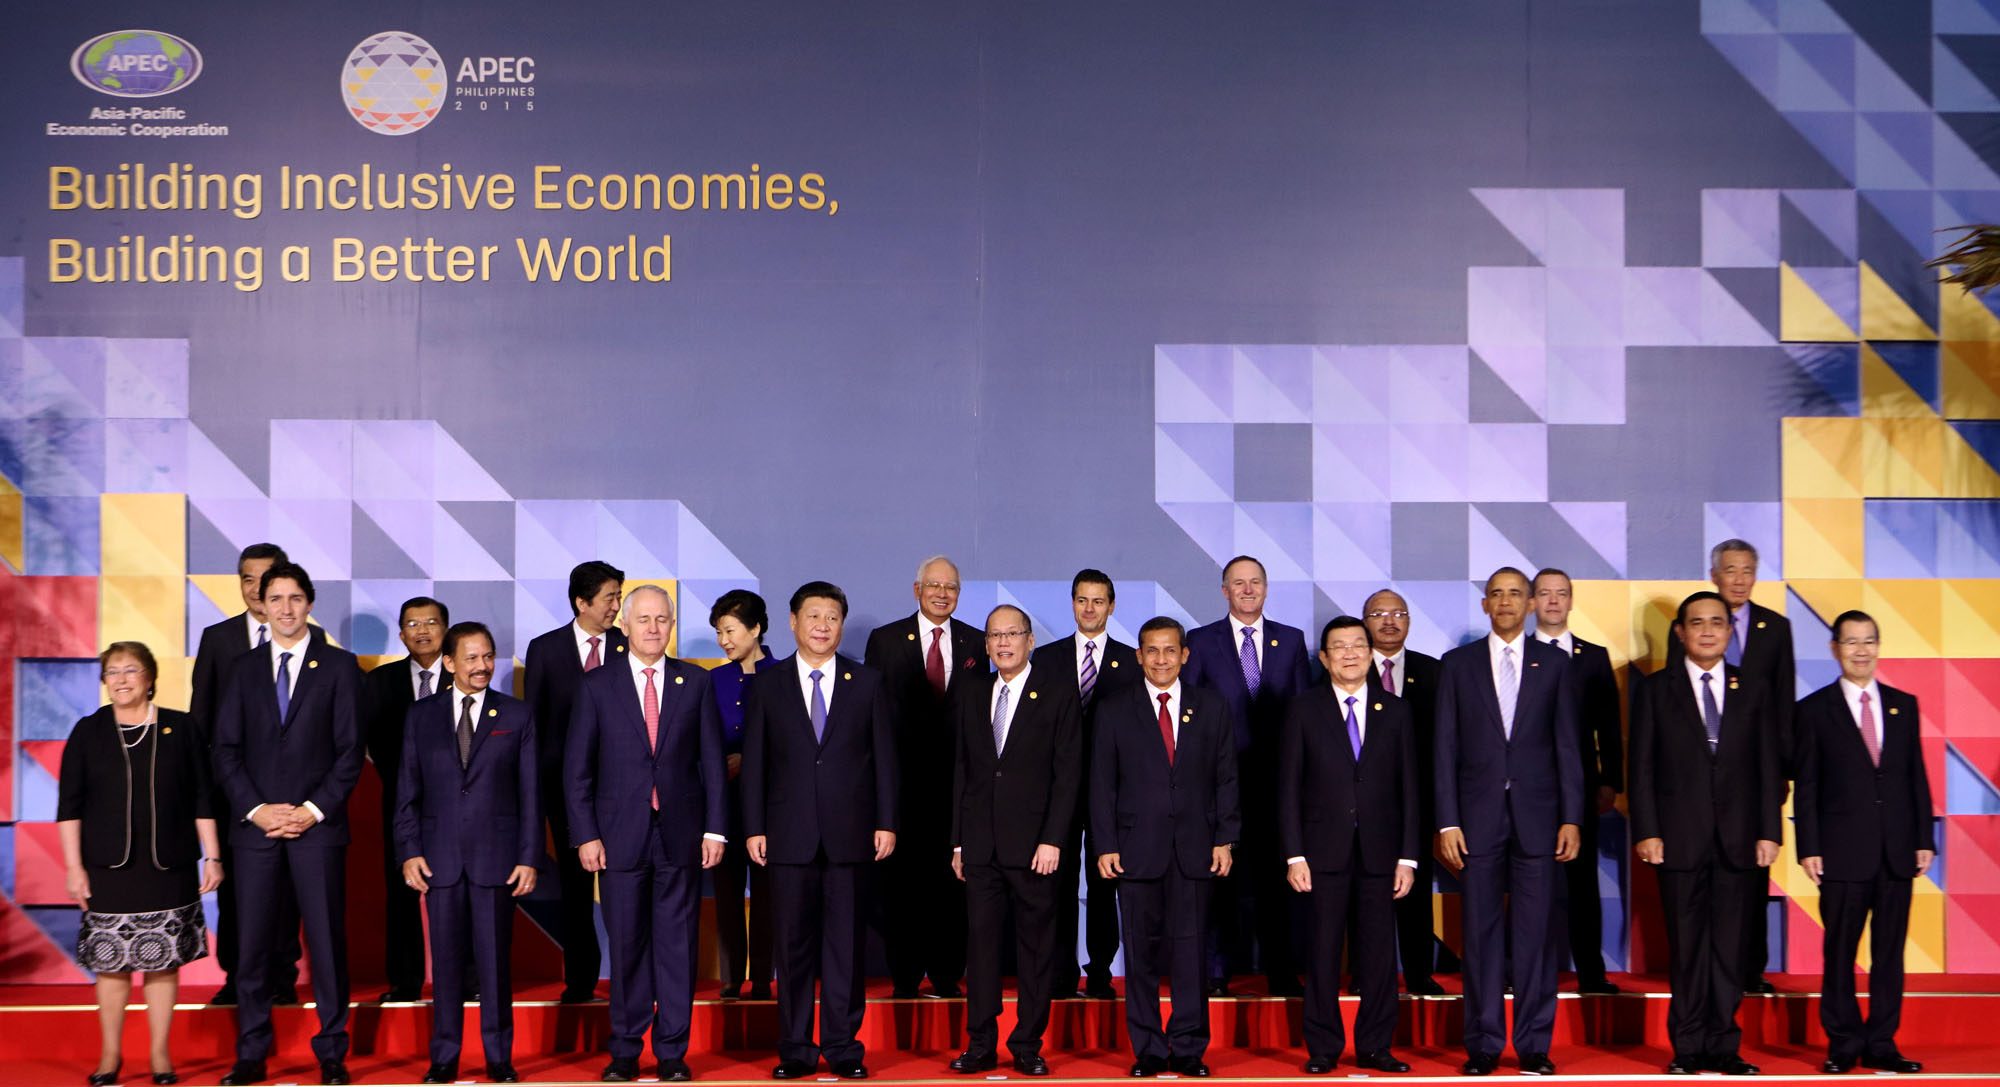 APEC 2015 chairman President Benigno S. Aquino III (6th from left) joins fellow APEC leaders (from left, front row): Republic of Chile President Michelle Bachelet; Canadian Prime Minister Justin Trudeau; Brunei Darussalam Prime Minister Sultan Hassanal Bolkiah; Commonwealth of Australia Prime Minister Malcolm Turnbull; People's Republic of China President Xi Jinping; Republic of Peru President Ollanta Humala; Socialist Republic of Vietnam President Truong Tan Sang; United States of America President Barack Obama; Kingdom of Thailand Prime Minister General Prayut Chan-o-Cha; and Chinese Taipei former Vice President Vincent Siew. (Back row, from left) Hong Kong Chief Executive CY Leung; Republic of Indonesia Vice President Jusuf Kalla; Japanese Prime Minister Shinzo Abe; Republic of Korea President Park Geun-hye; Malaysian Prime Minister Najib Razak; United Mexican States President Enrique Peña Nieto; New Zealand Prime Minister John Key; Independent State of Papua New Guinea Prime Minister Peter O'Neill; Russian Federation Prime Minister Dmitry Medvedev; and Republic of Singapore Prime Minister Lee Hsien Loong. Photo by Rey Baniquet / Malacañang Photo Bureau  